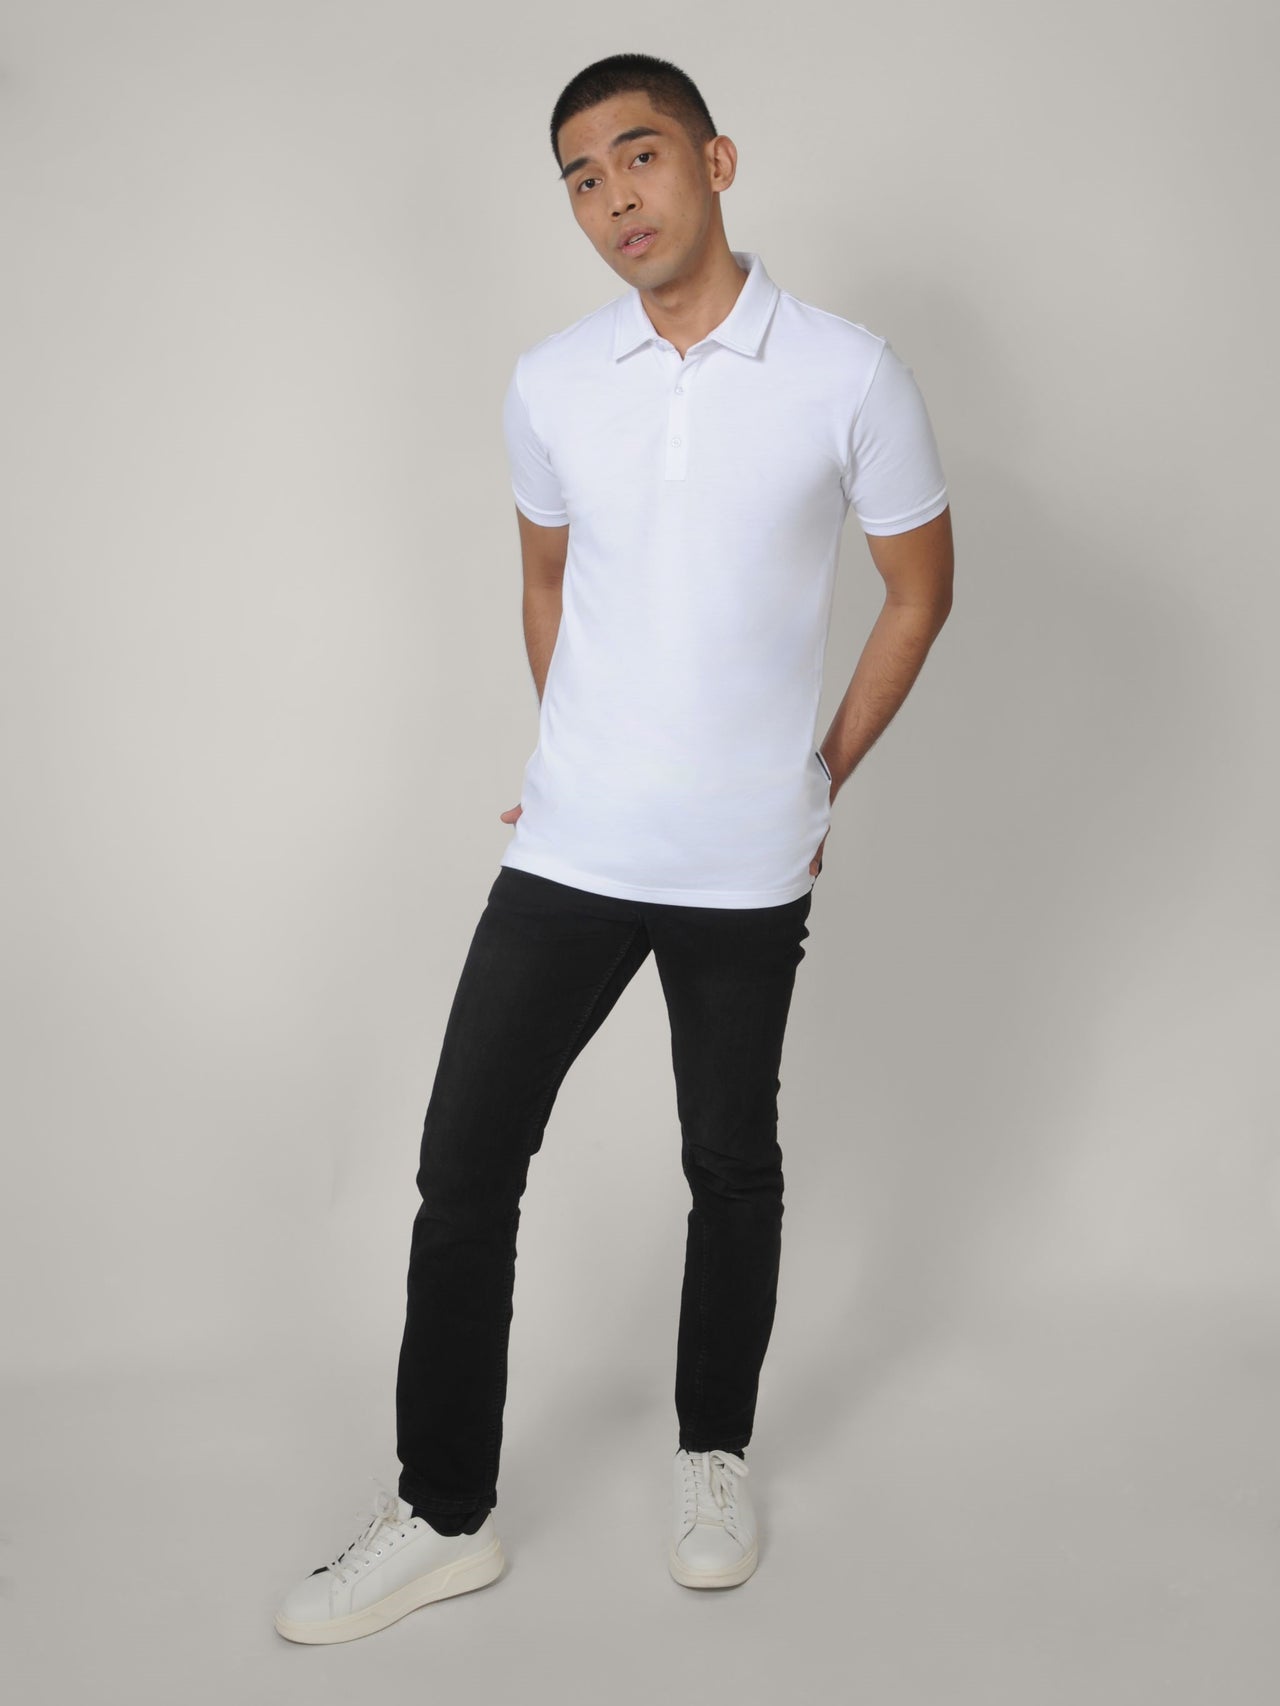 A head to toe shot of a tall skinny guy wearing a tall white pique polo shirt, hands behind back.